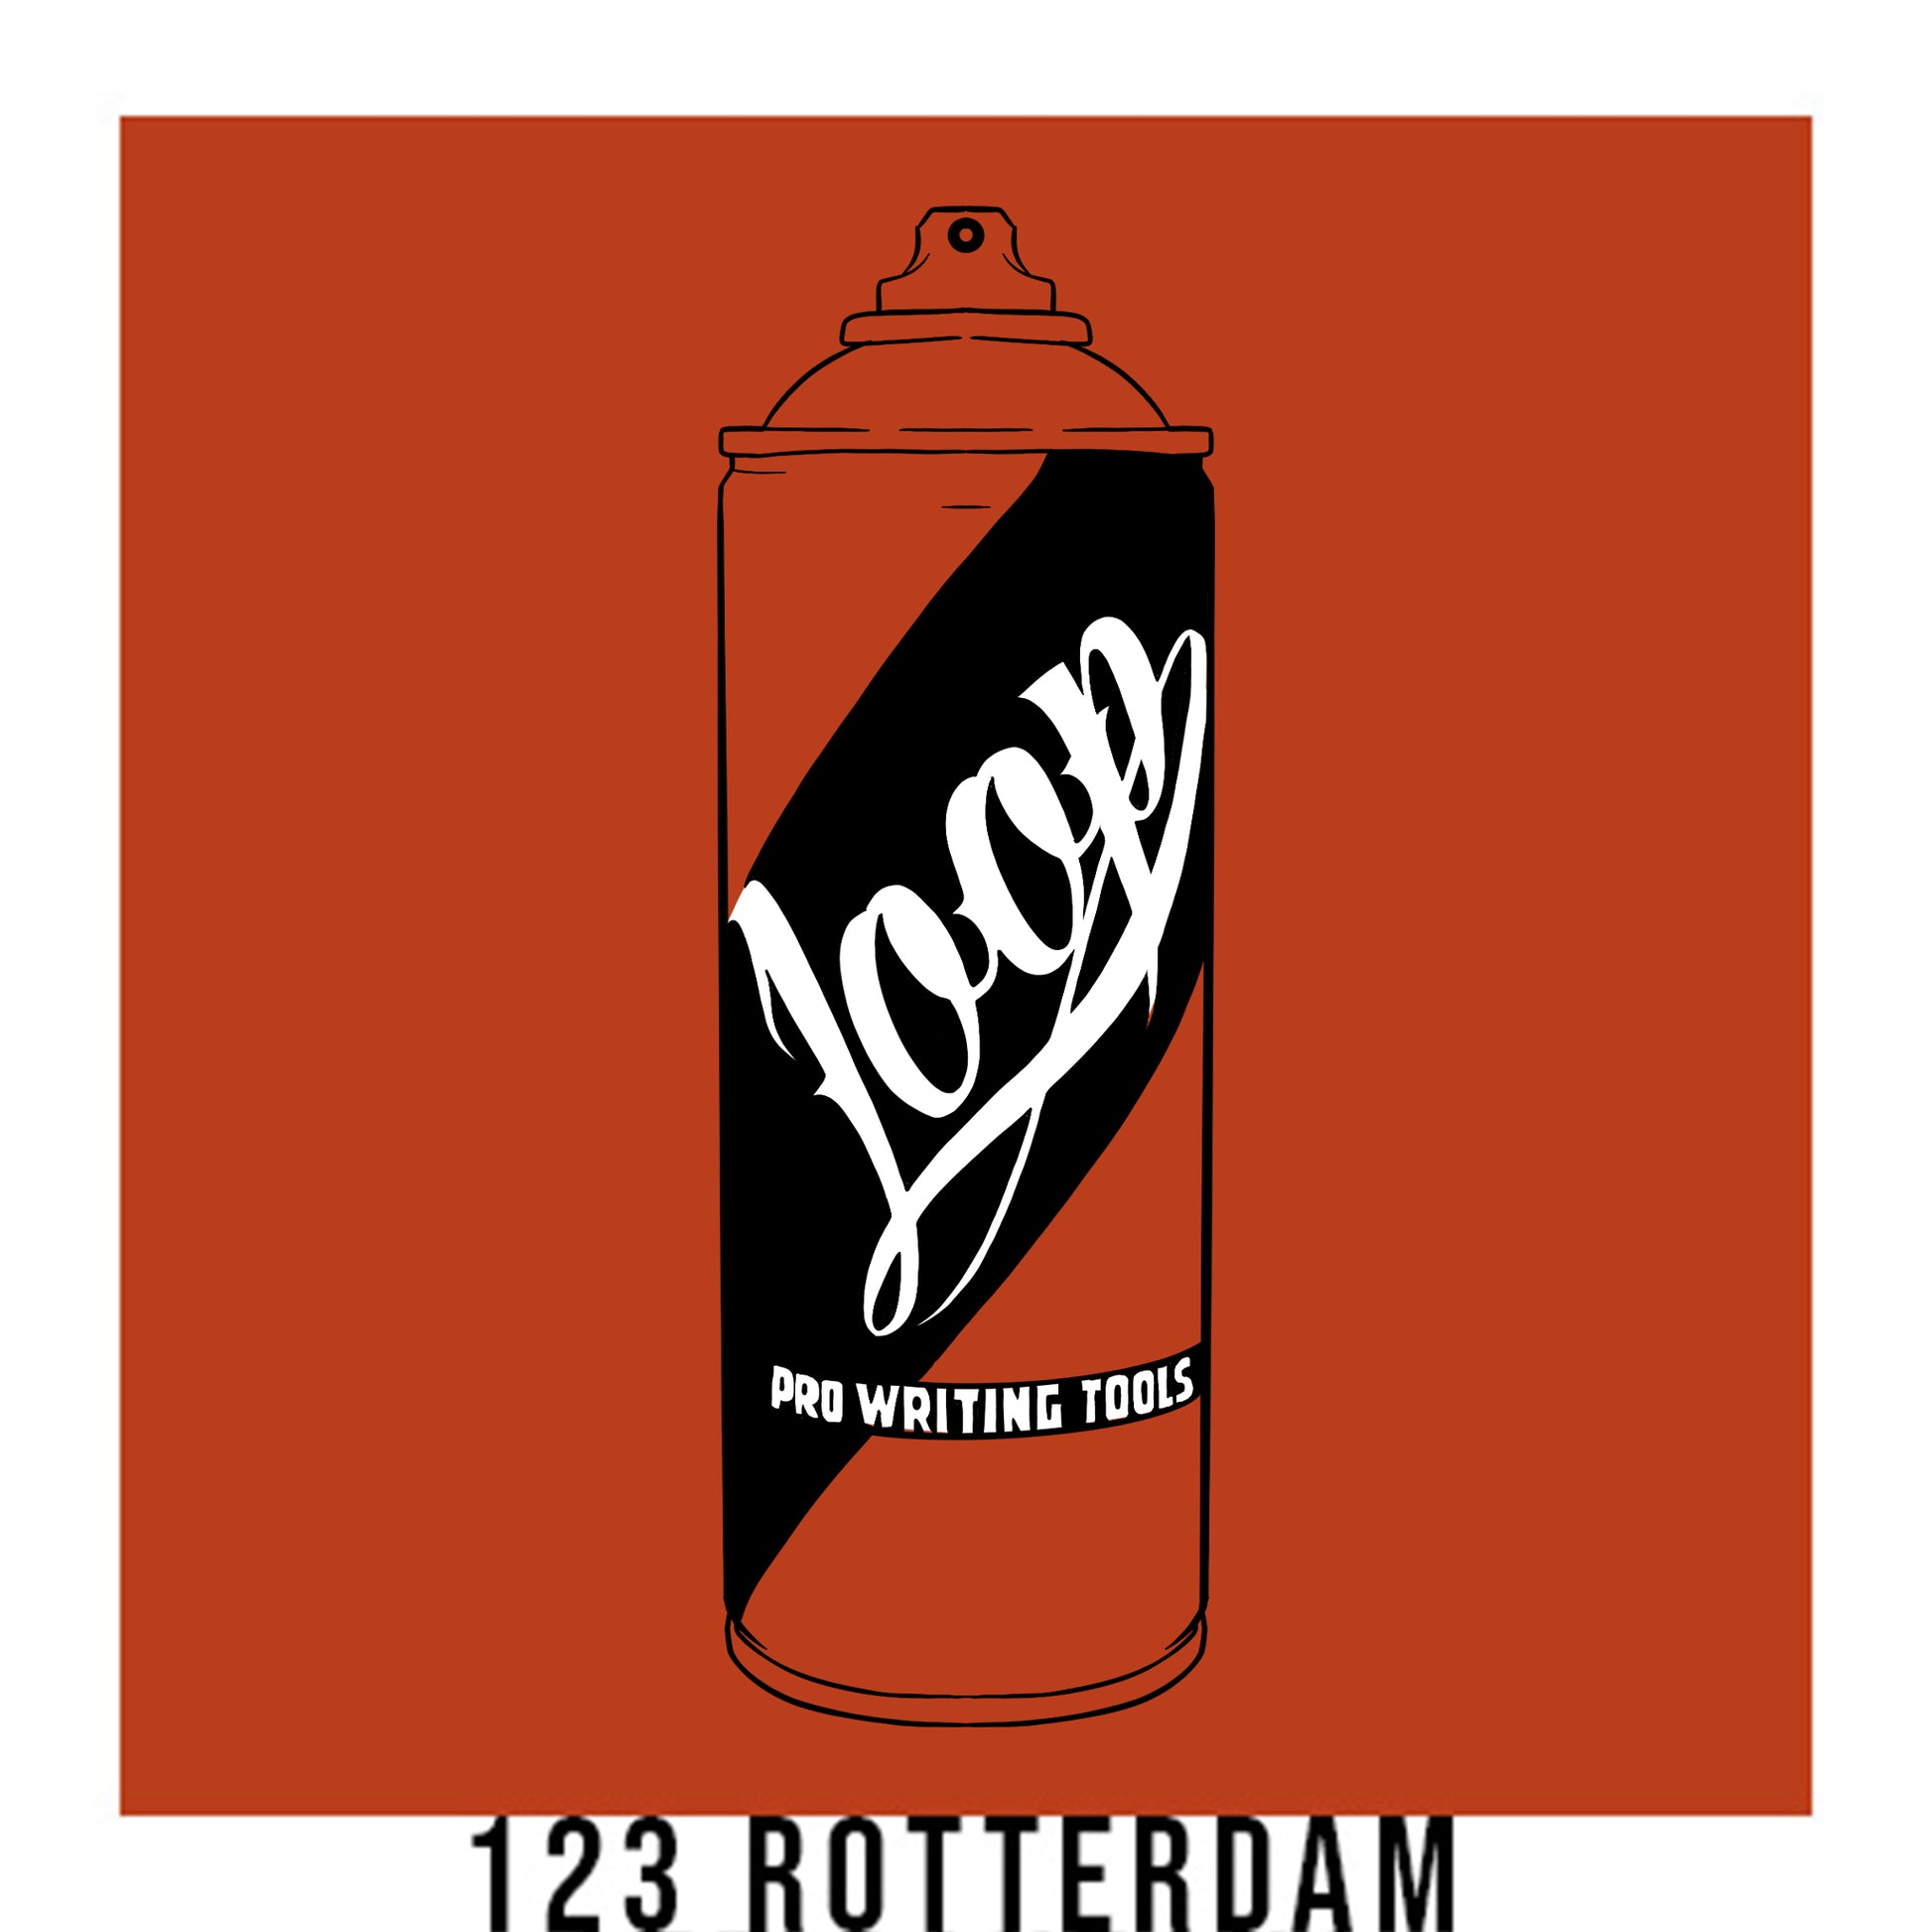 A black outline drawing of a red orange spray paint can with the word "Loop" written on the face in script. The background is a color swatch of the same red orange with a white border with the words "123 rotterdam" at the bottom.